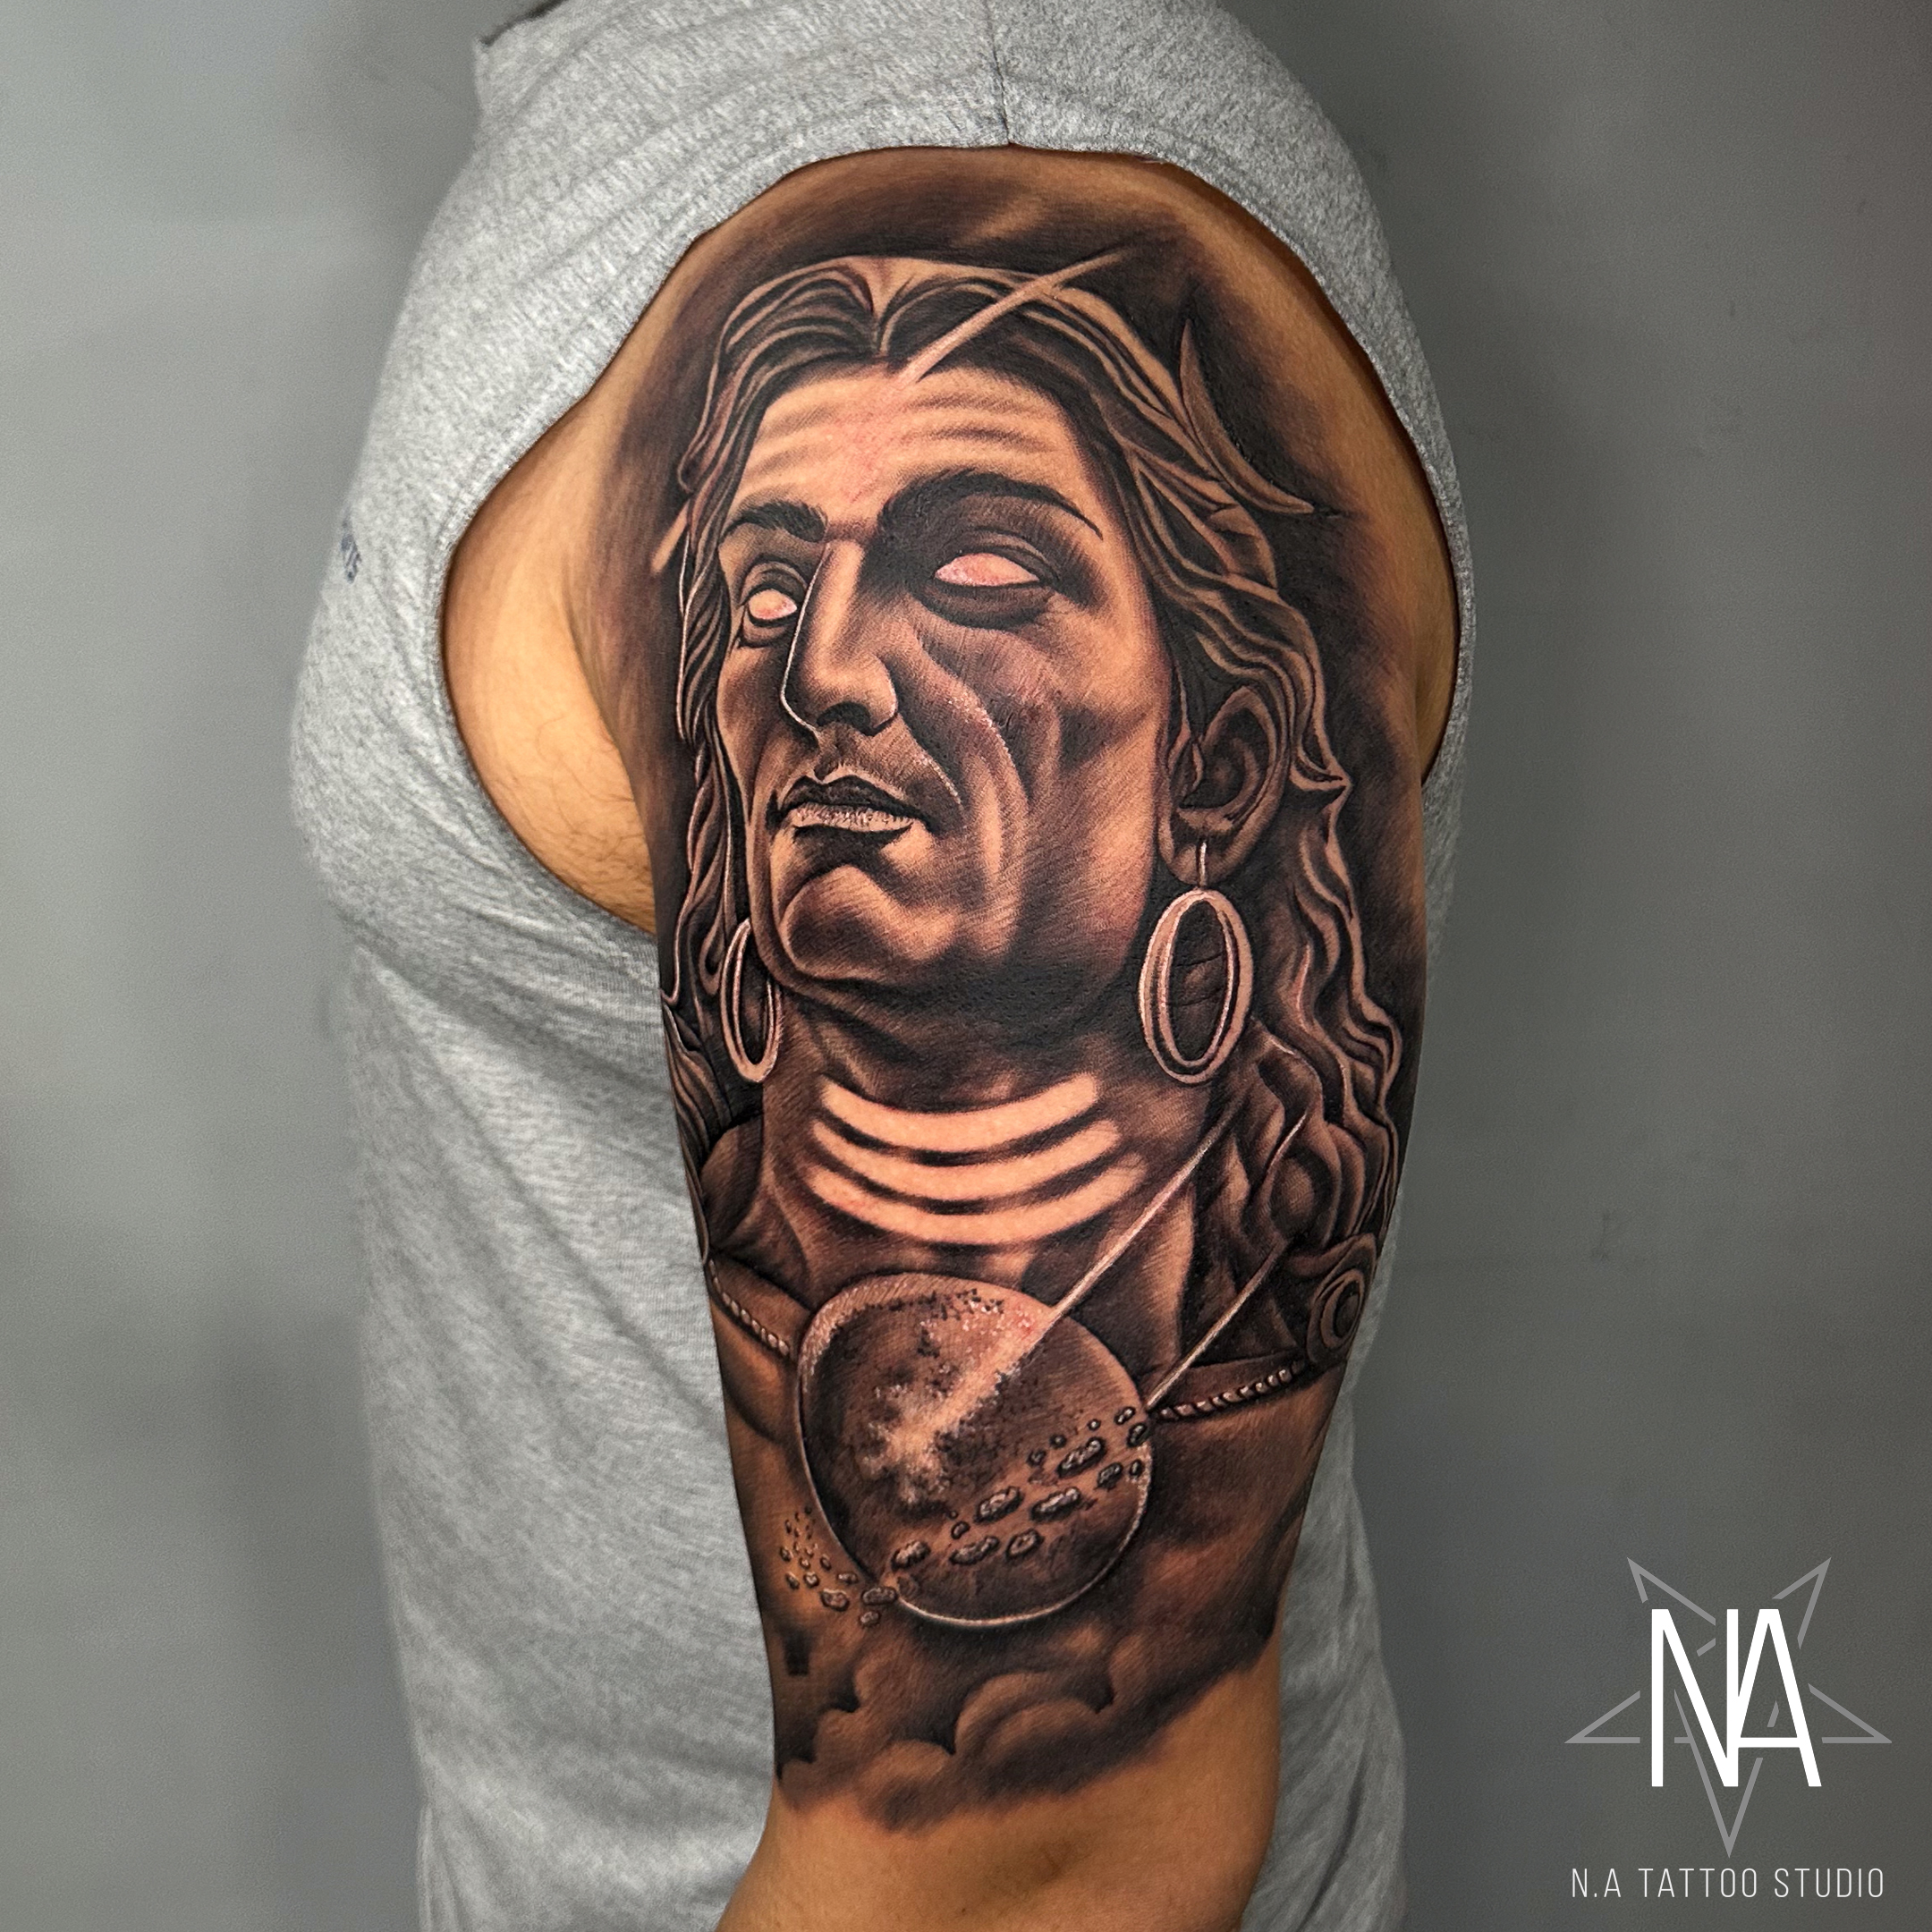 Native American for ancestry | Native american warrior tattoos, American indian  tattoos, Native american tattoos